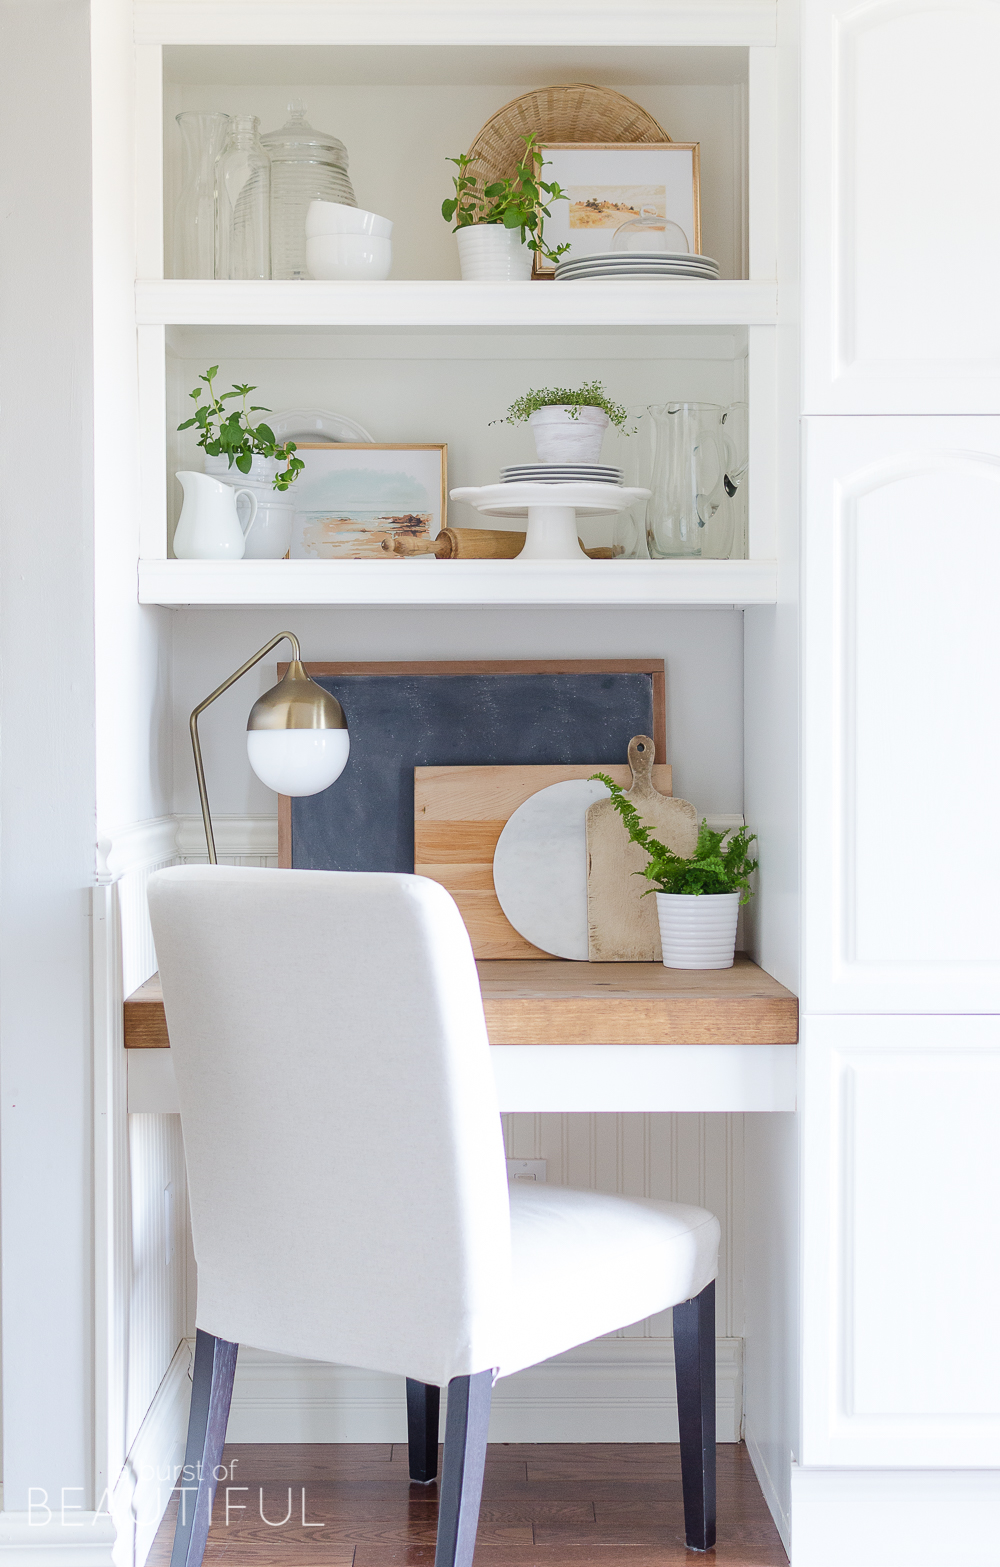 Learn how to style open shelving in the kitchen and create this effortless modern farmhouse look